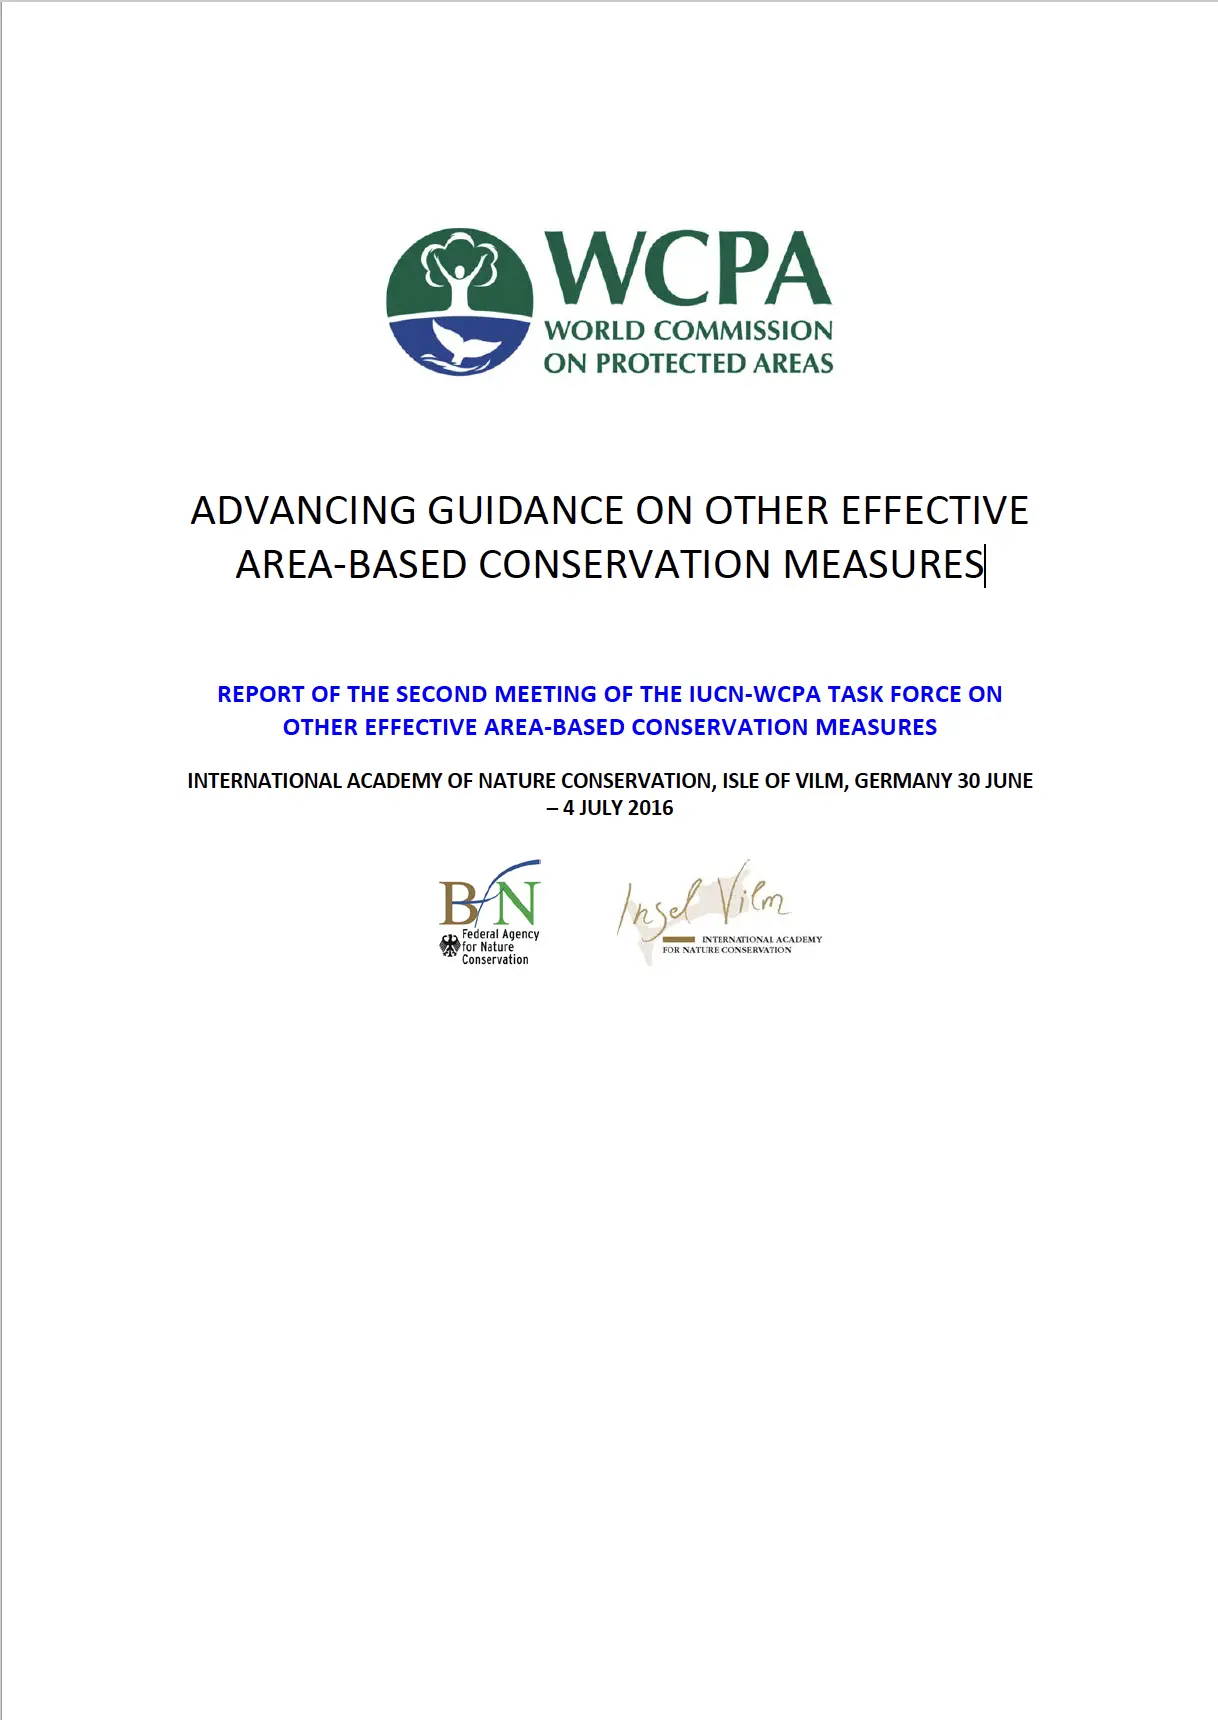 ADVANCING GUIDANCE ON OTHER EFFECTIVE AREA-BASED CONSERVATION MEASURES